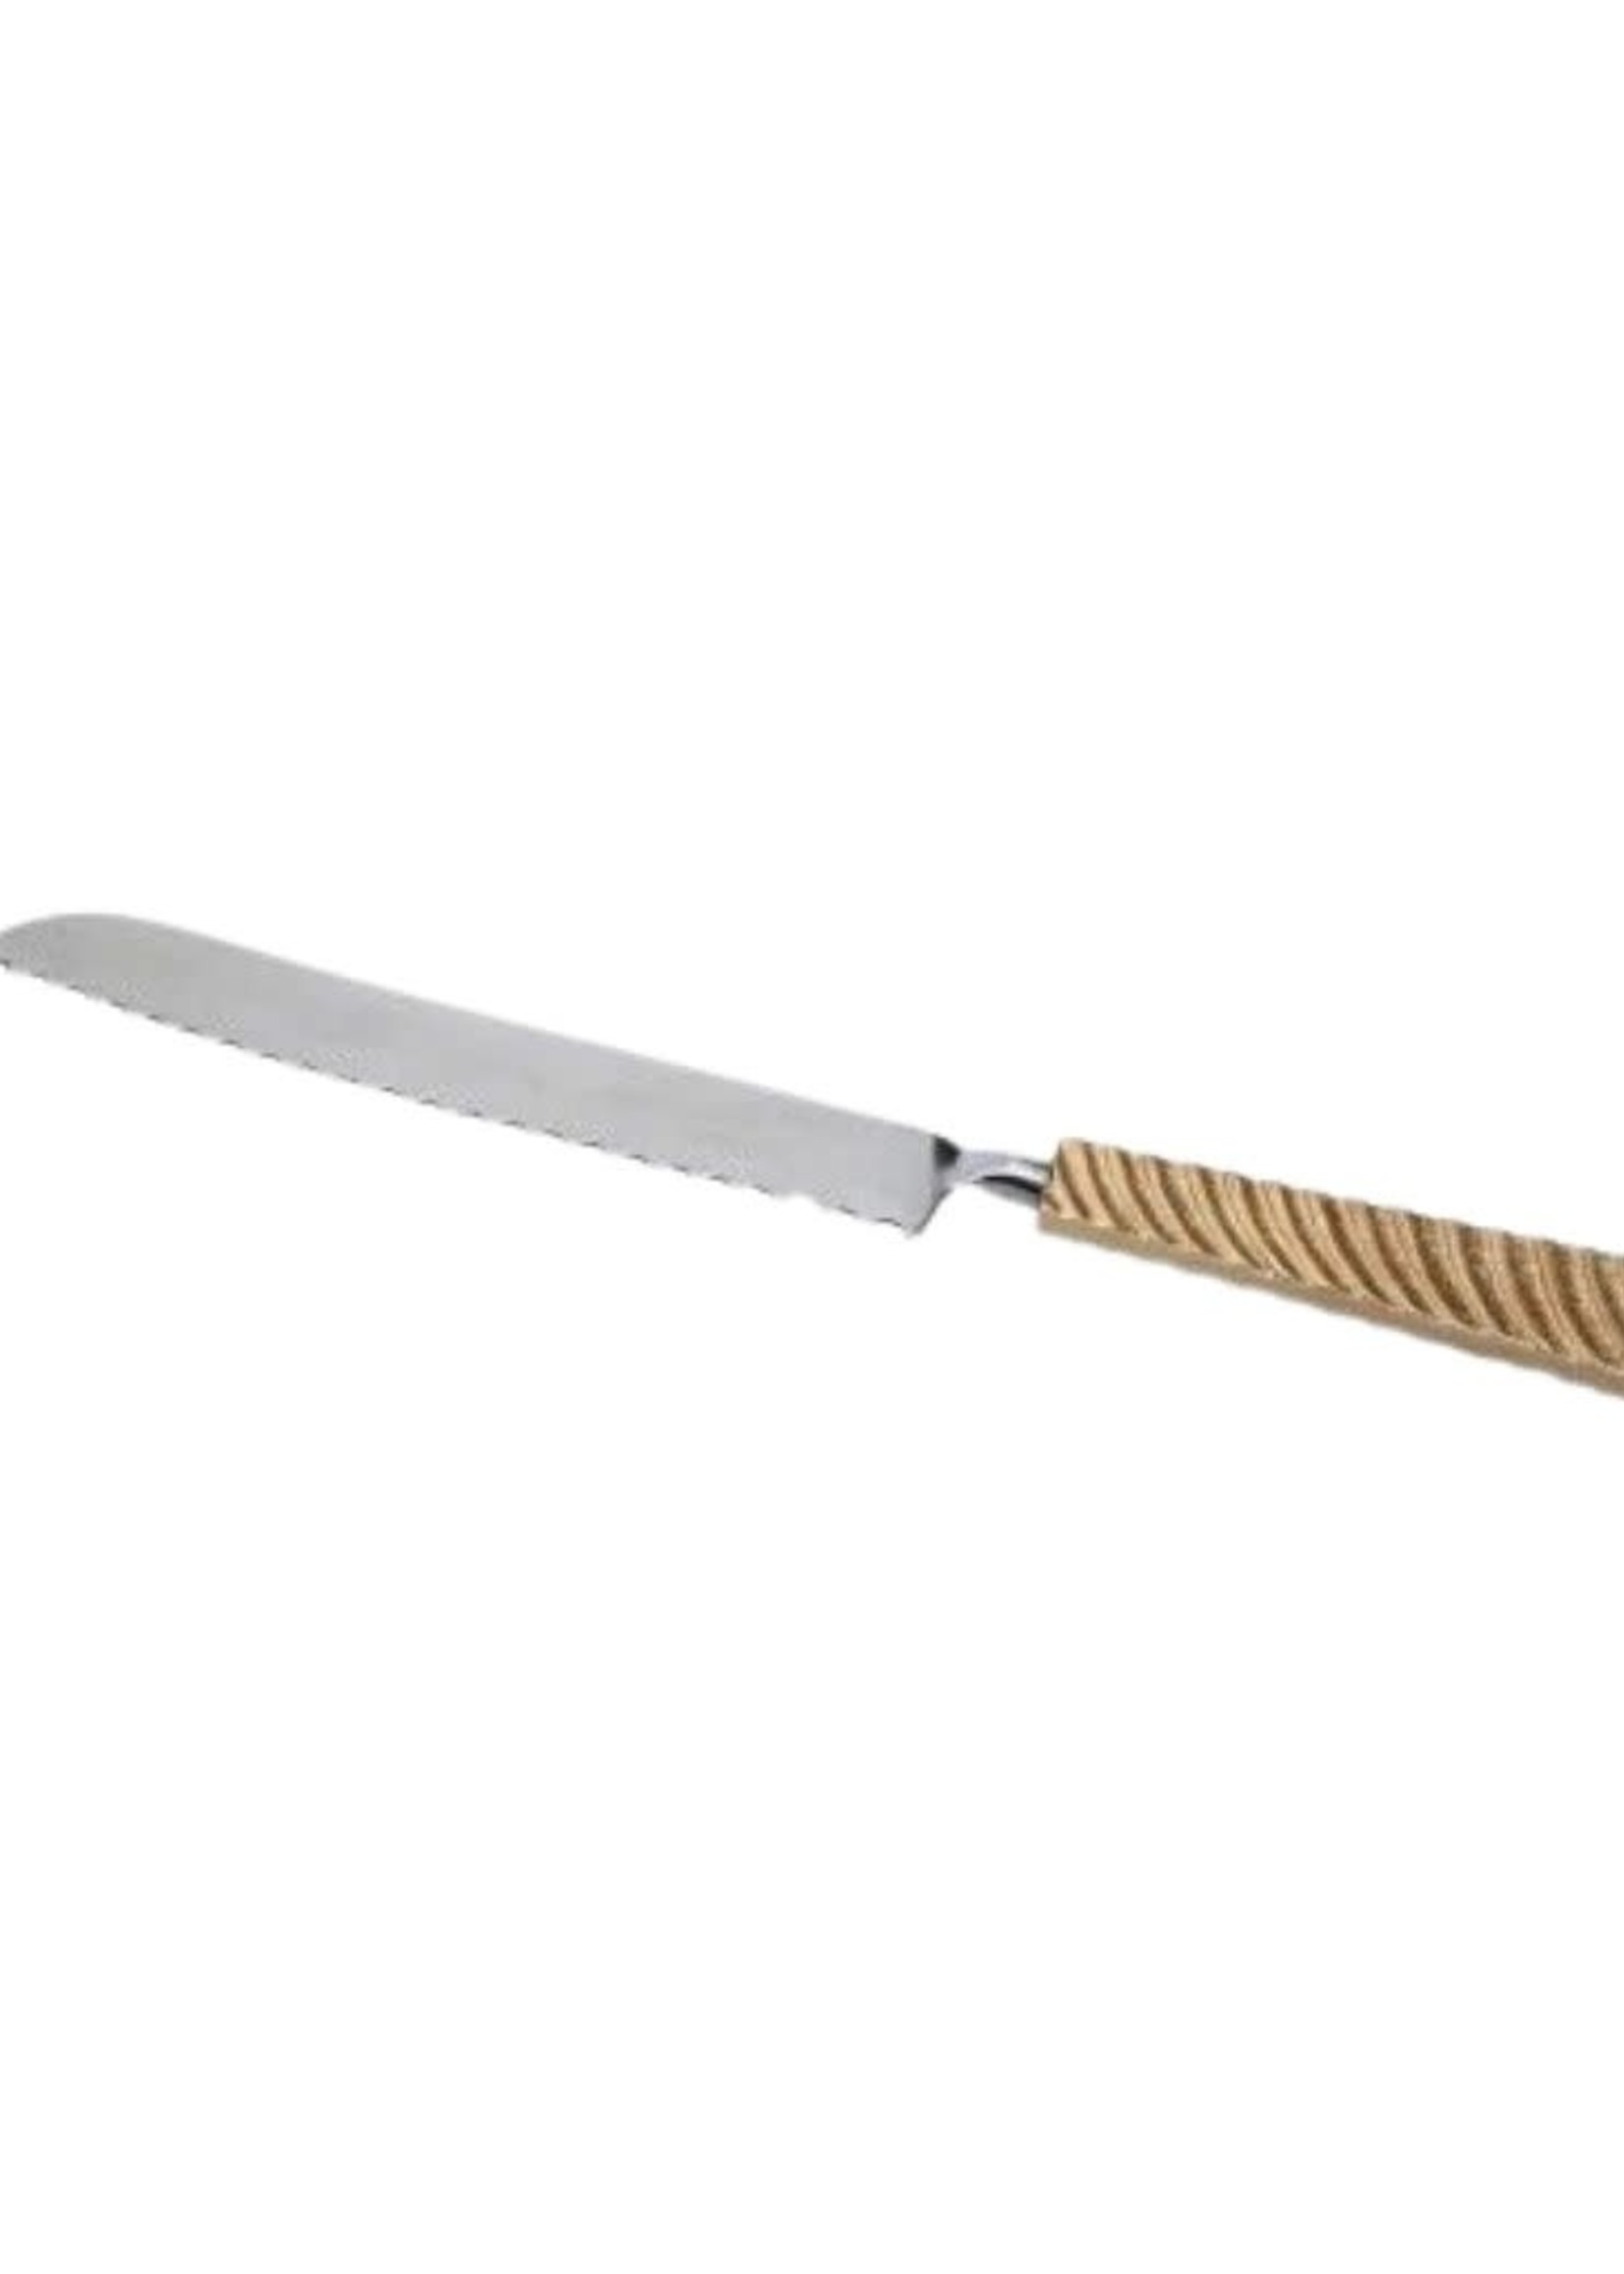 Knife with Gold Wavy Handles